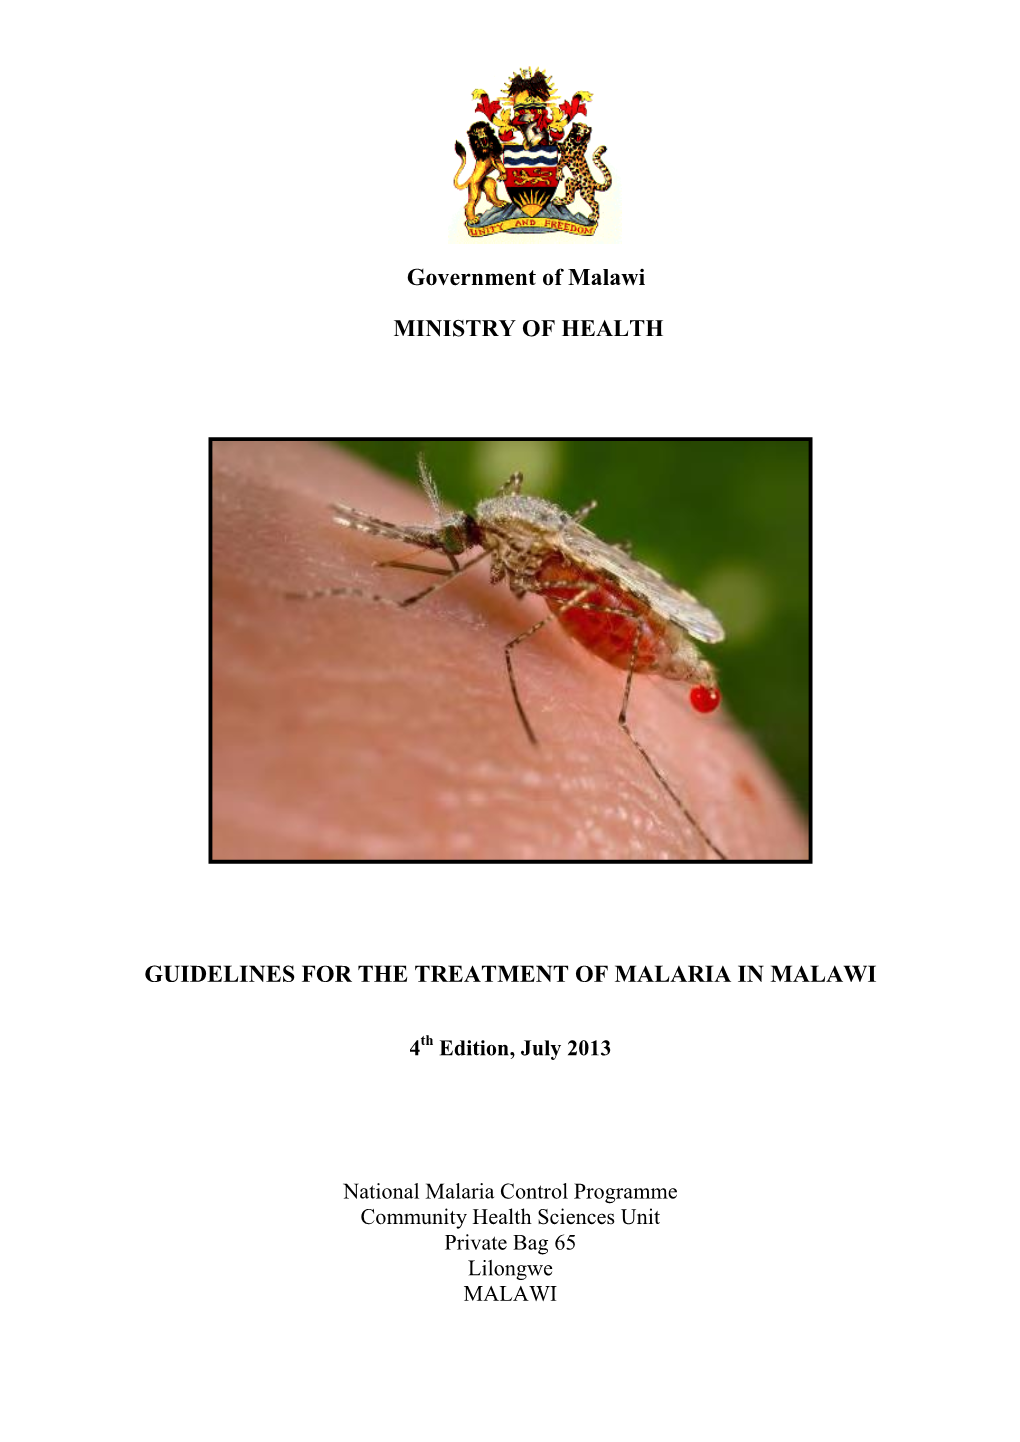 Guidelines for the Treatment of Malaria in Malawi